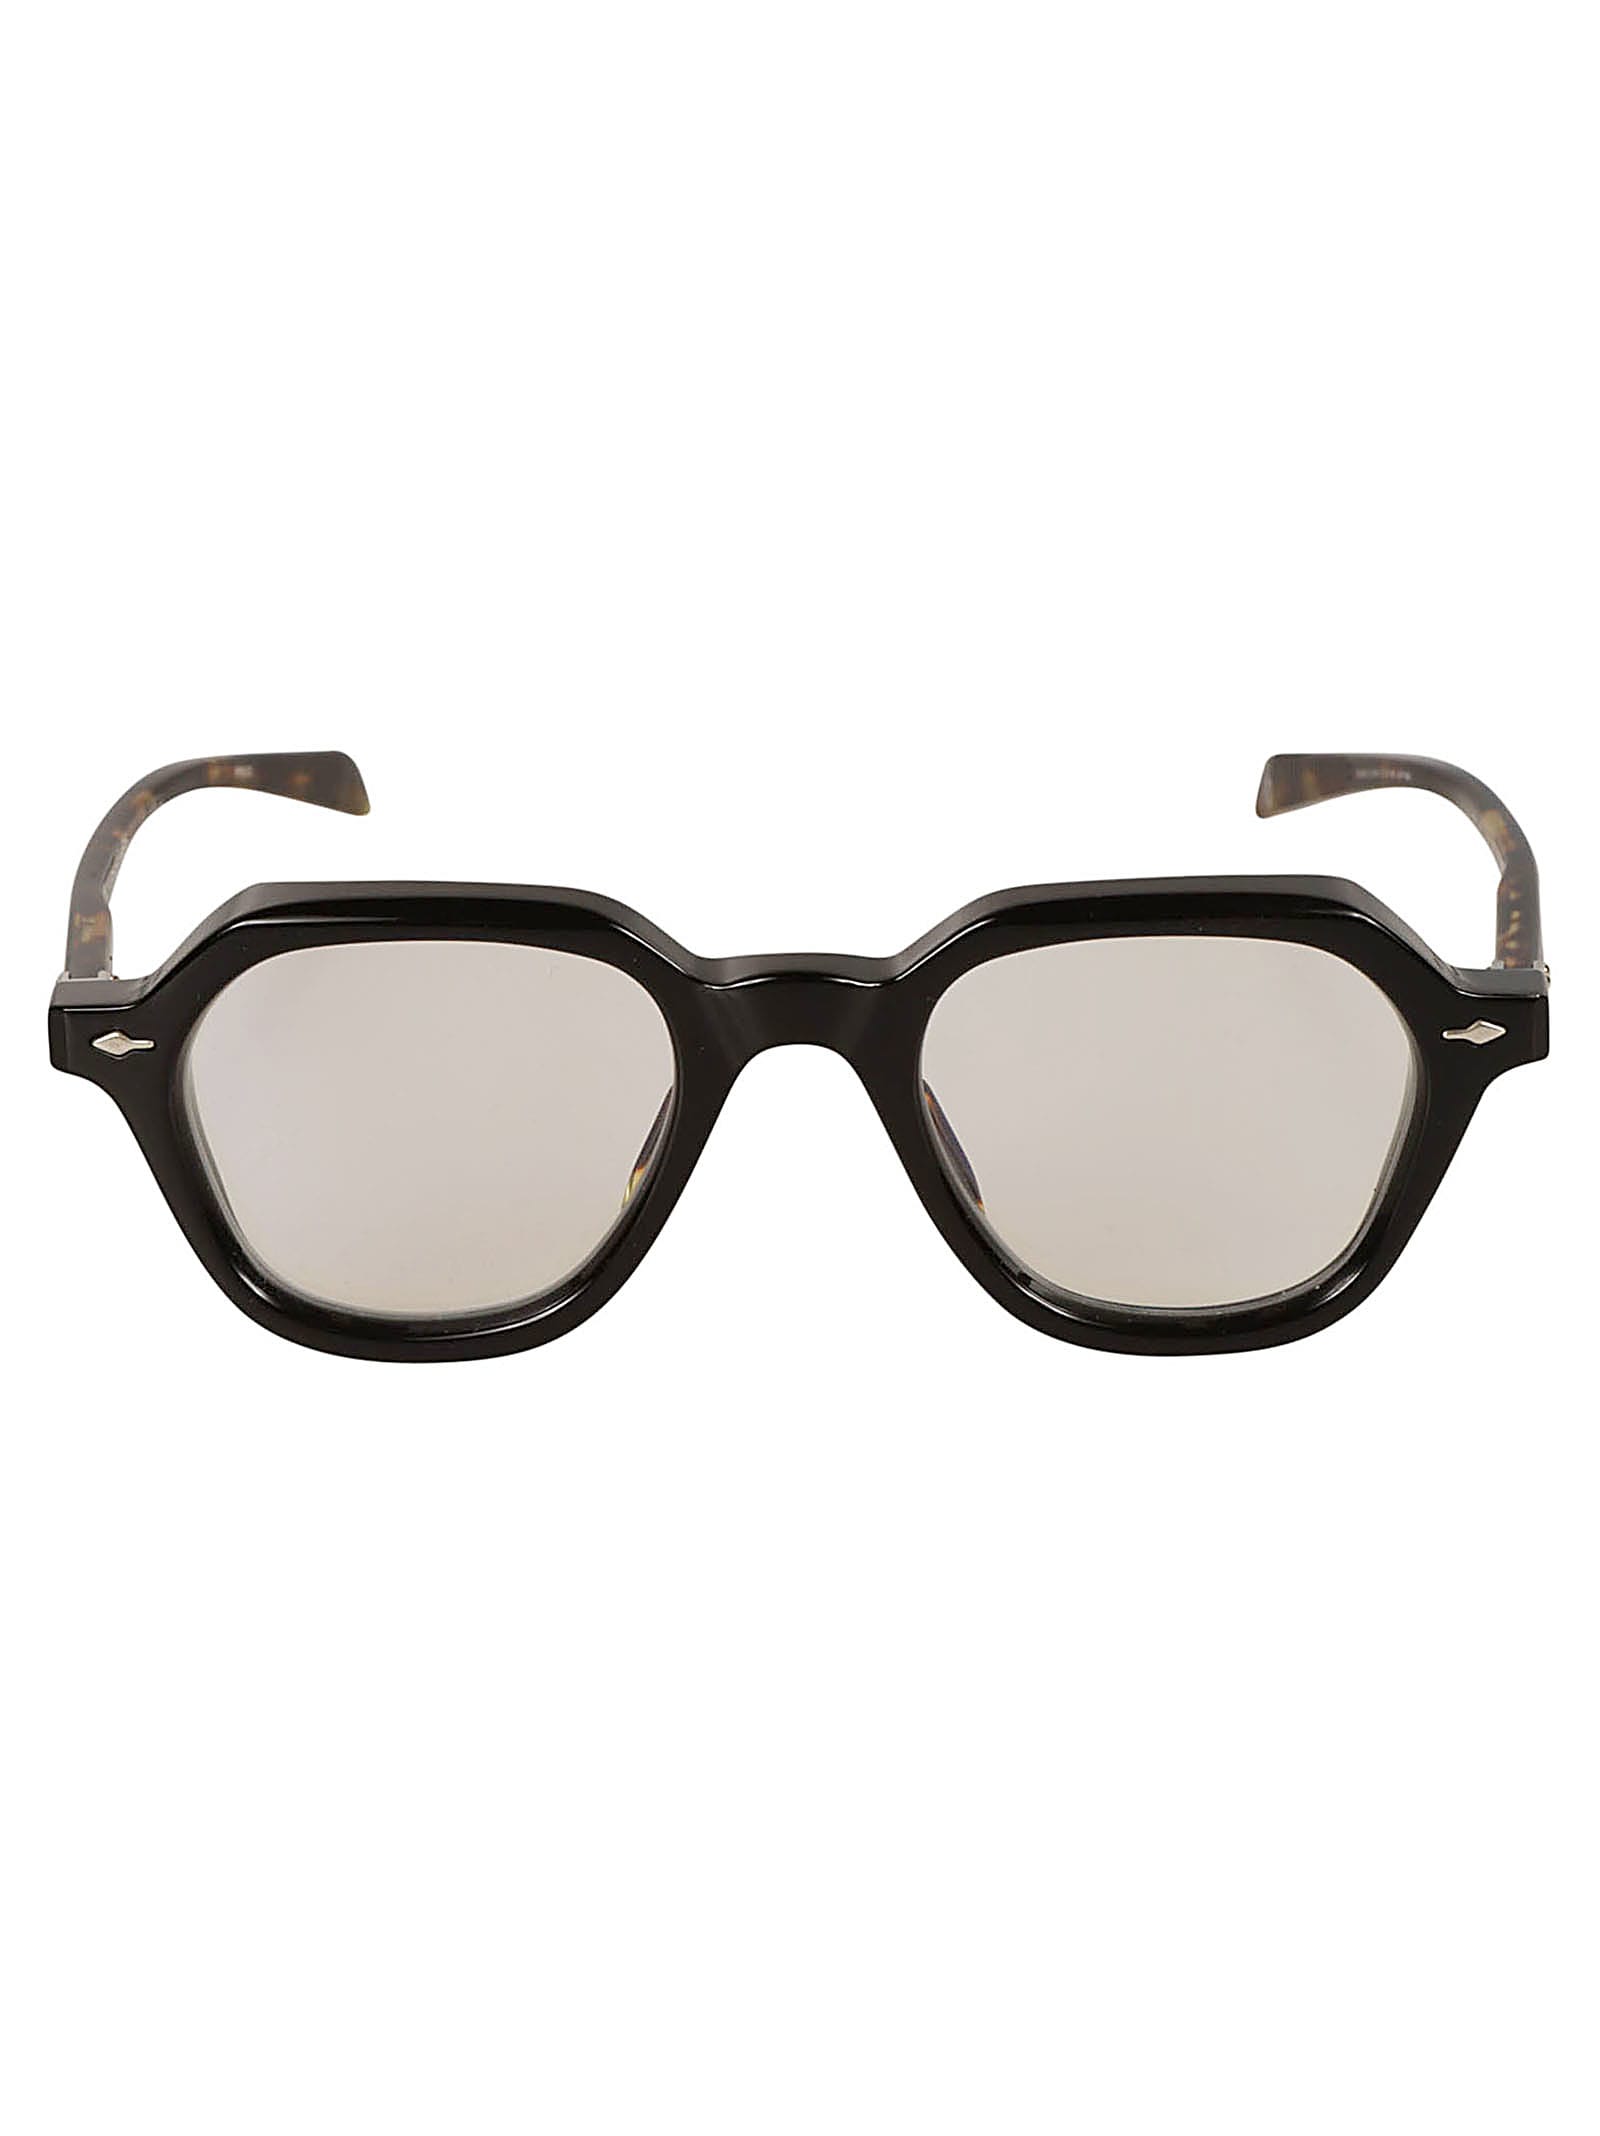 Jacques Marie Mage Insley Frame Glasses In Black